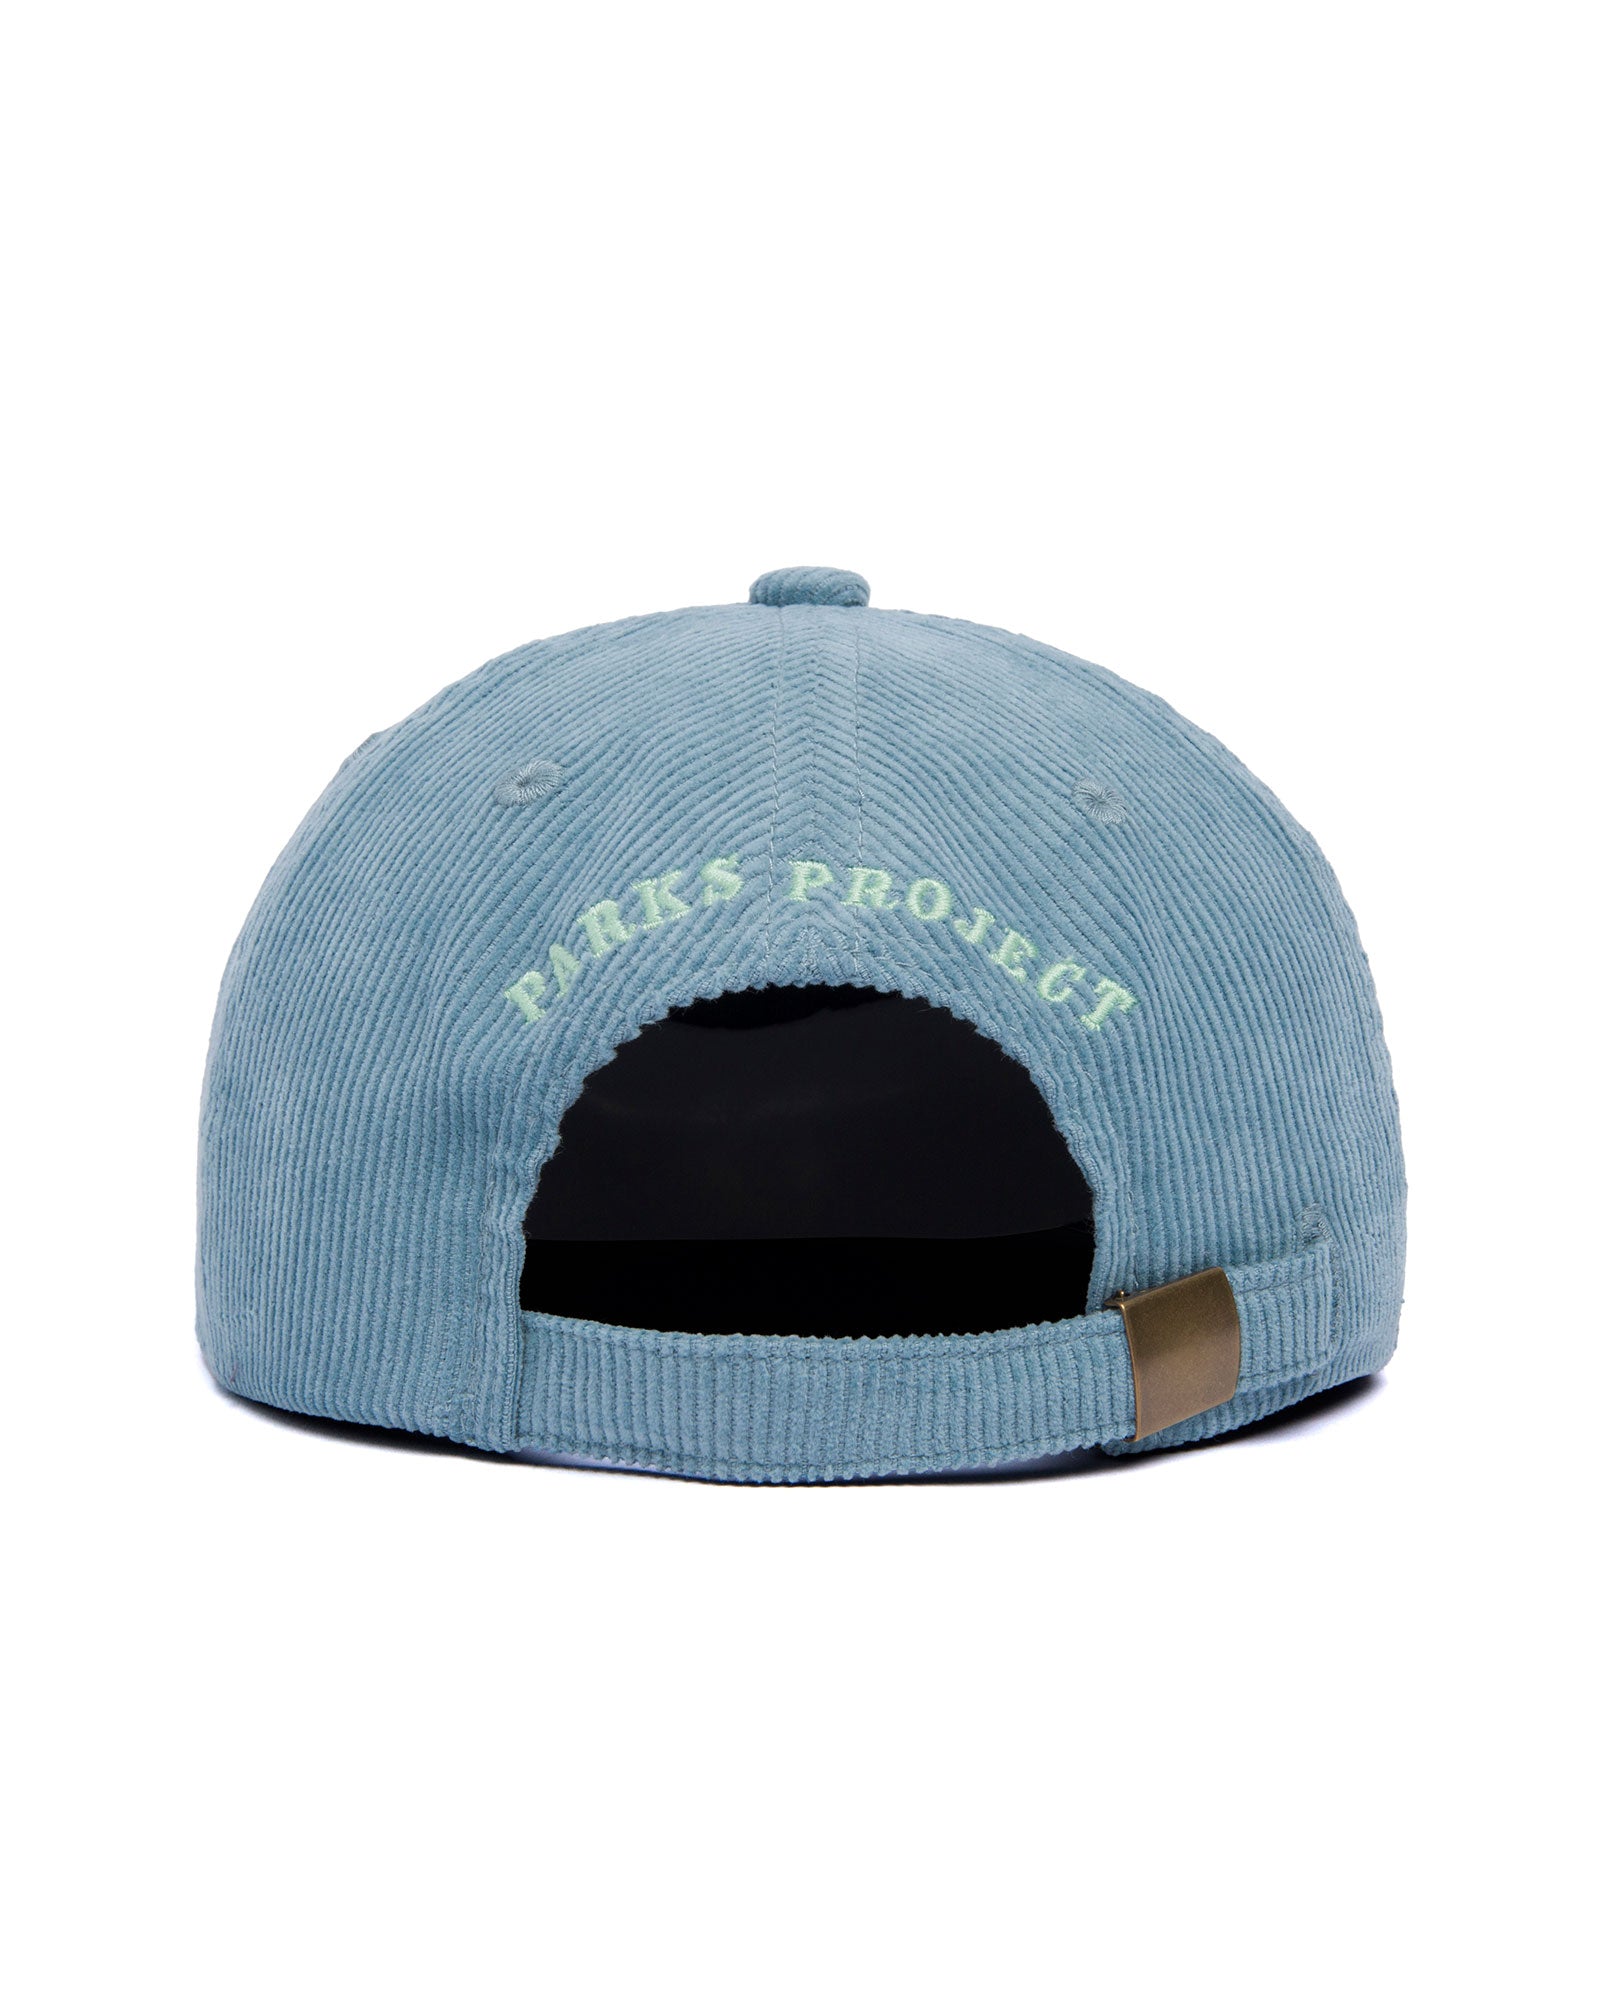 Parks Project Yosemite NP Cord Hat Dusty Teal, One Size